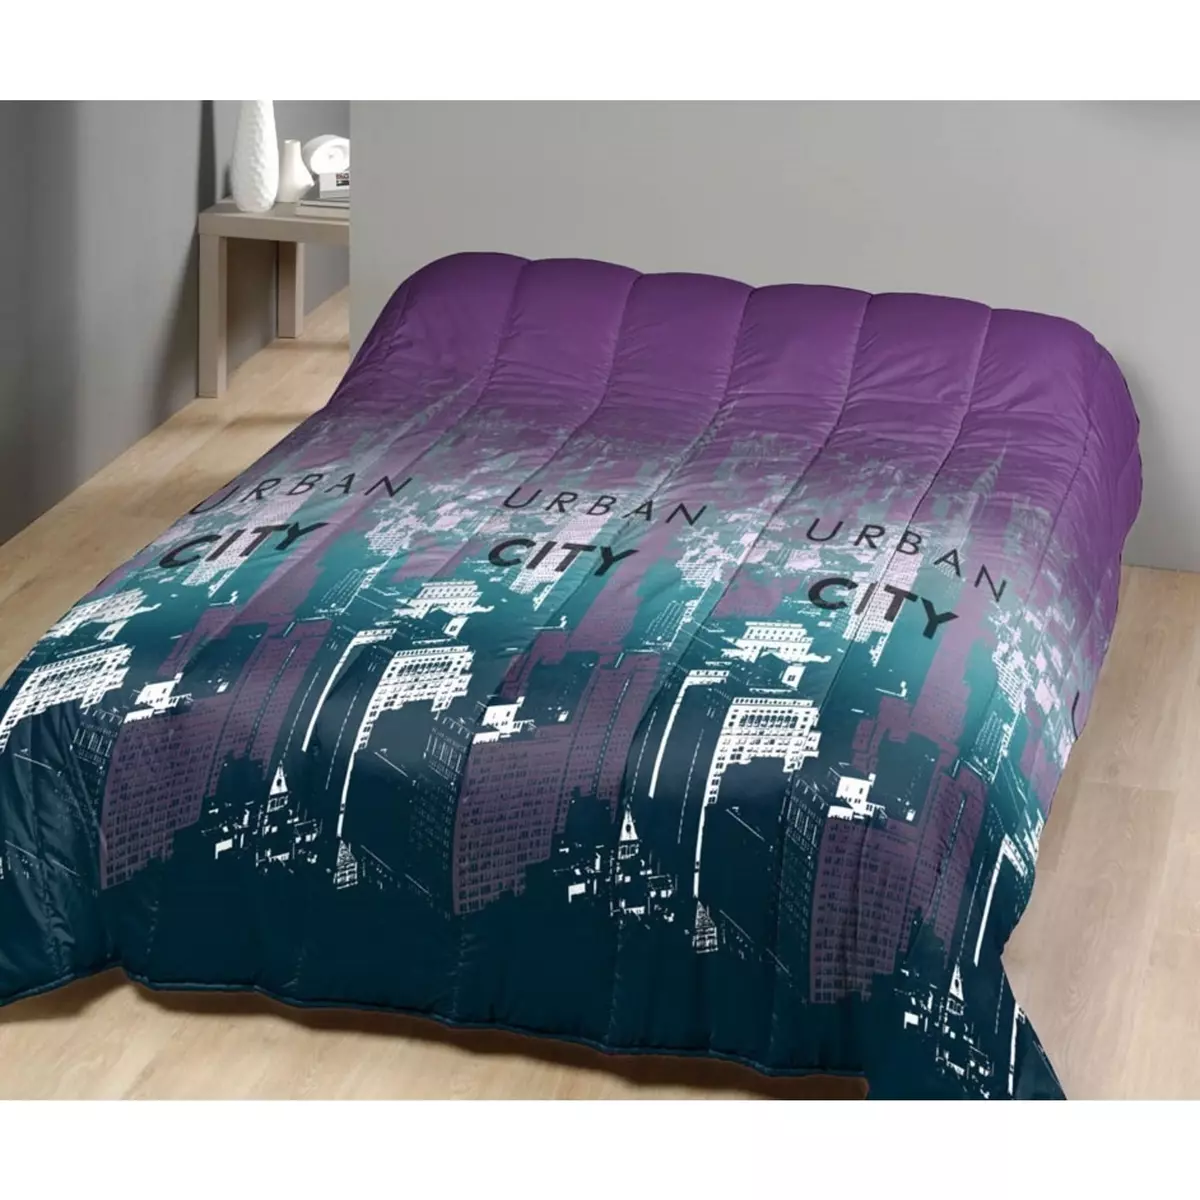 Couette simple face polyester URBAN CITY